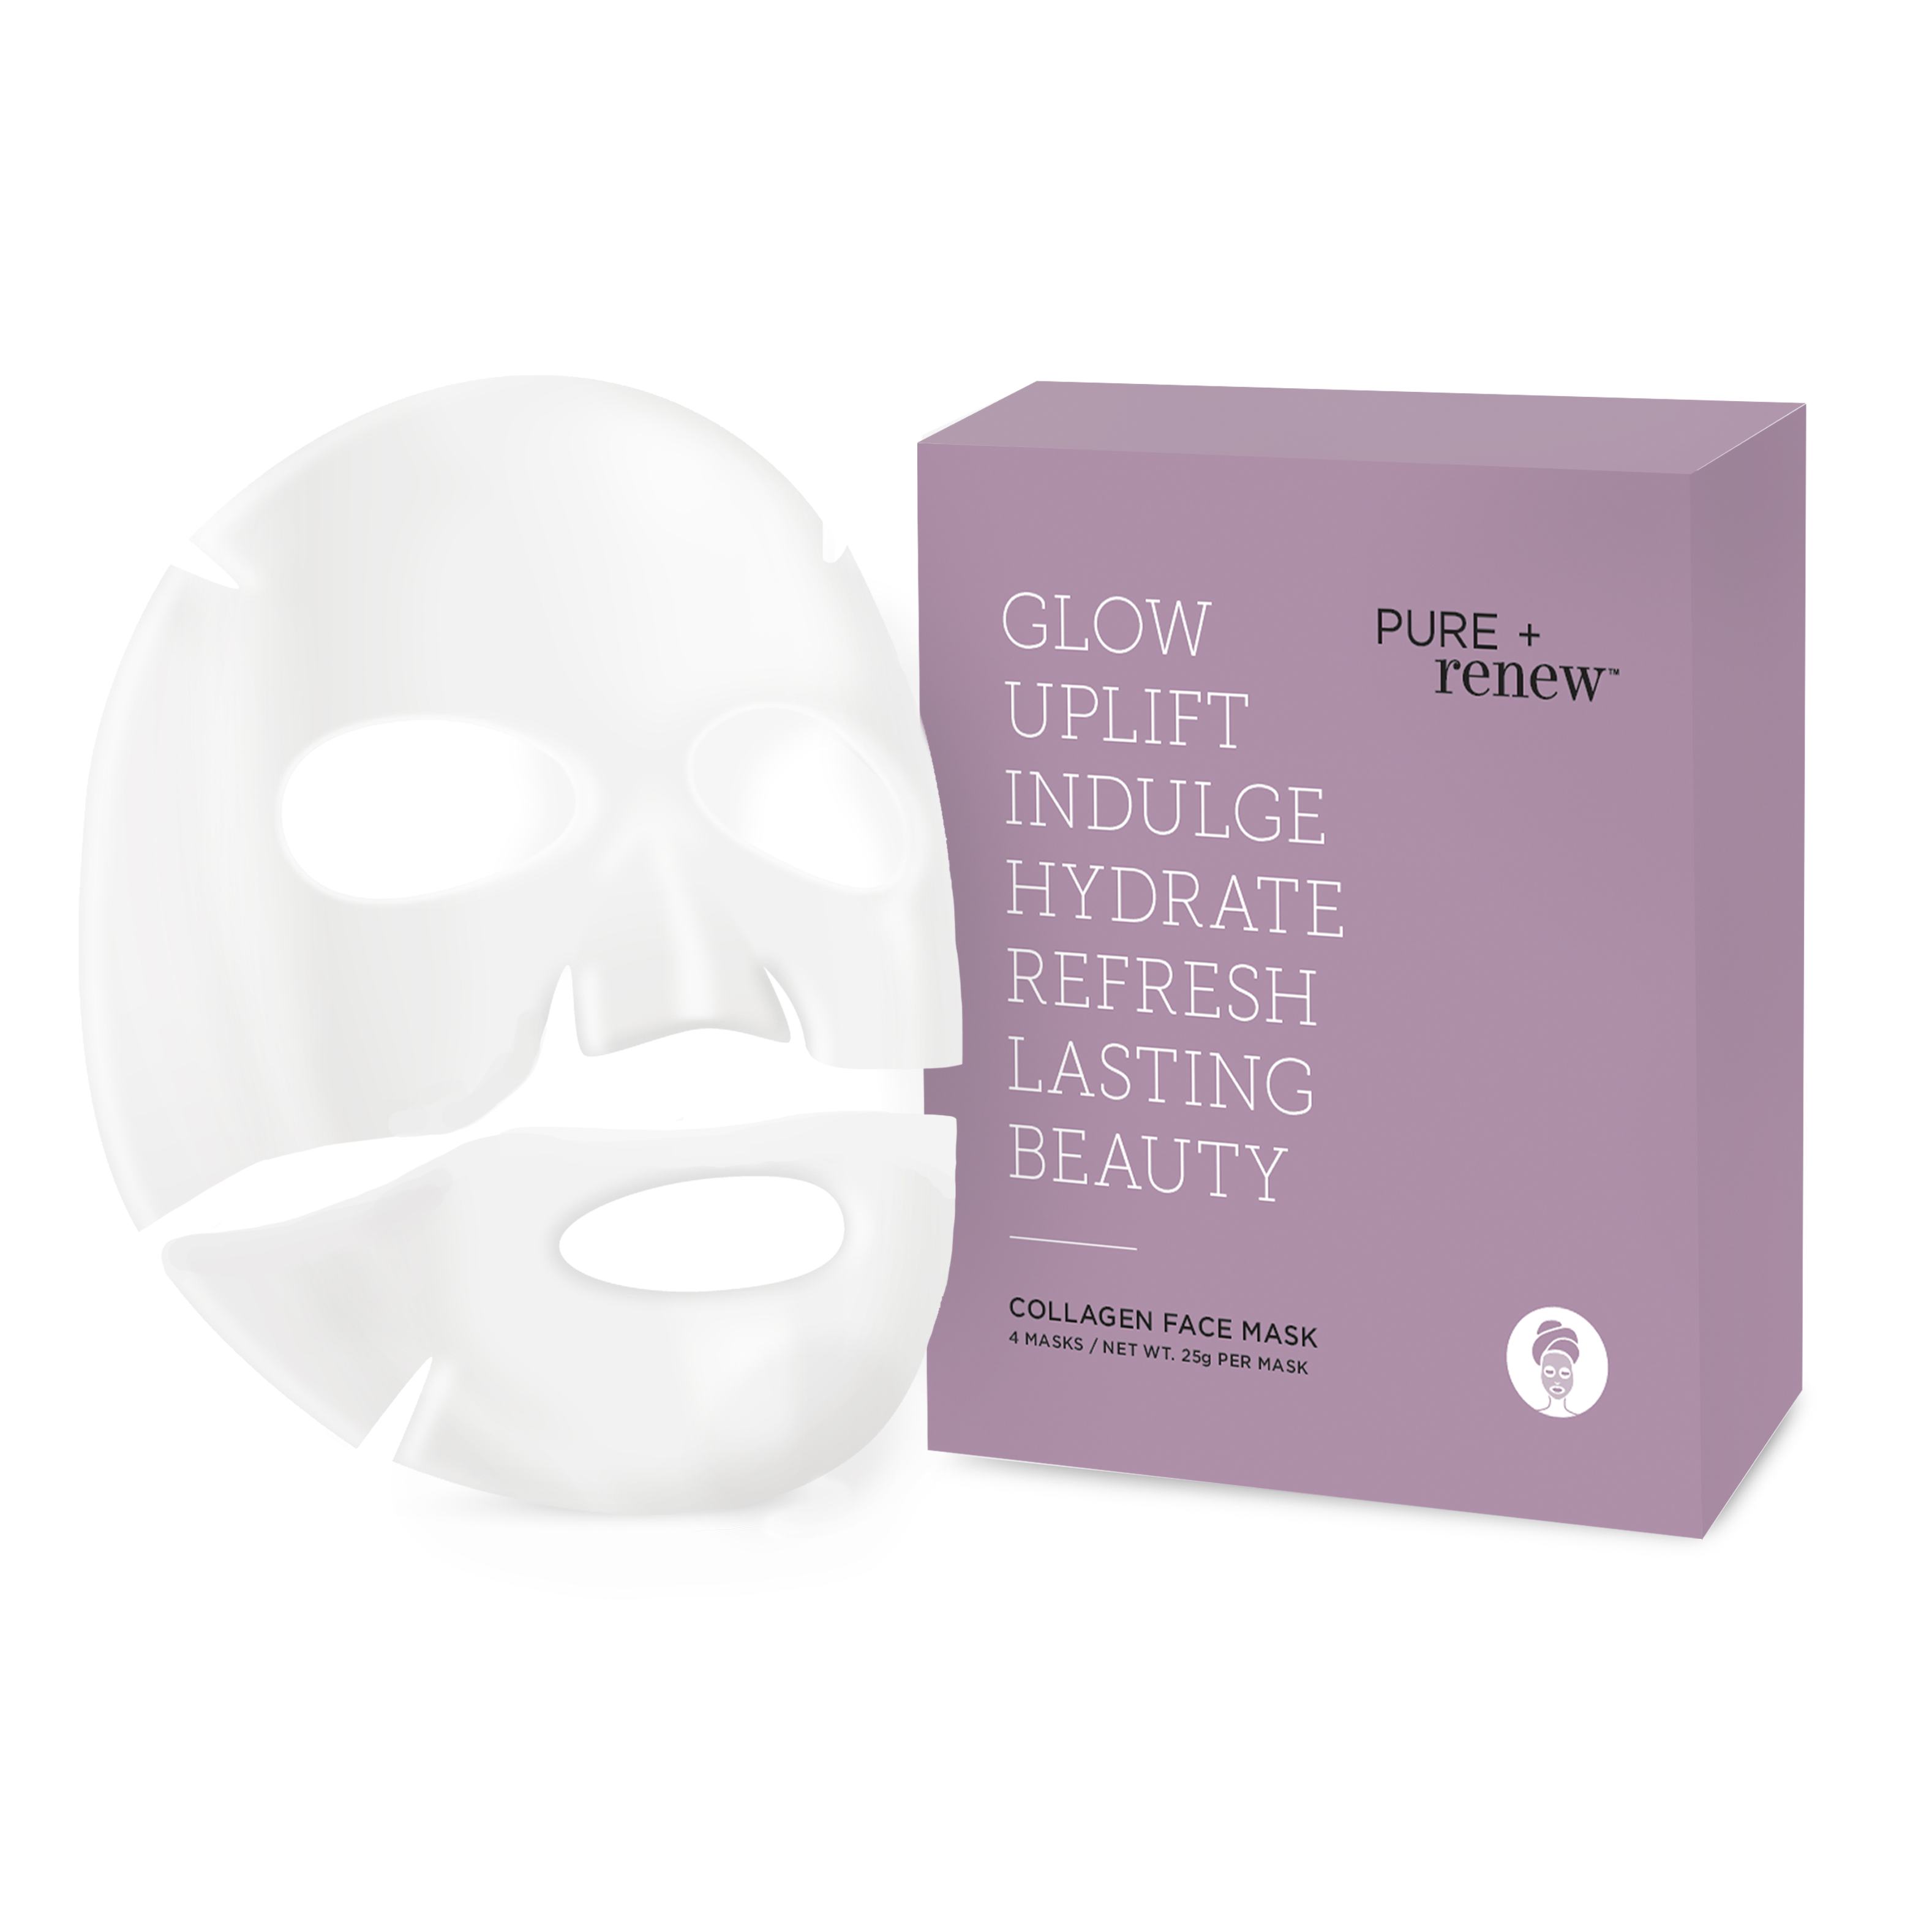 Image of PURE + renew Collagen Boosting Face Mask